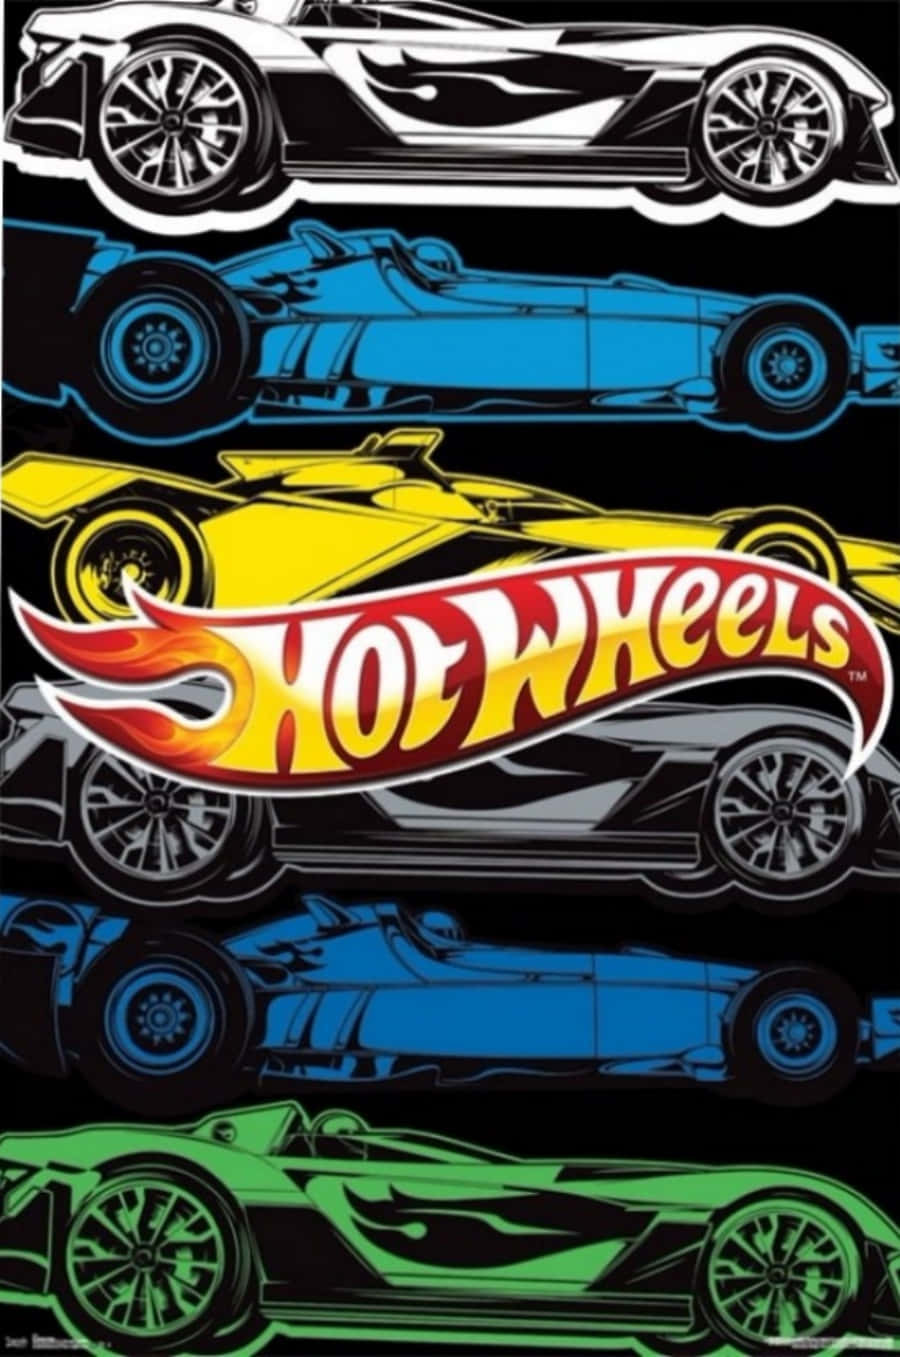 Hot Wheels Poster With Different Colored Cars